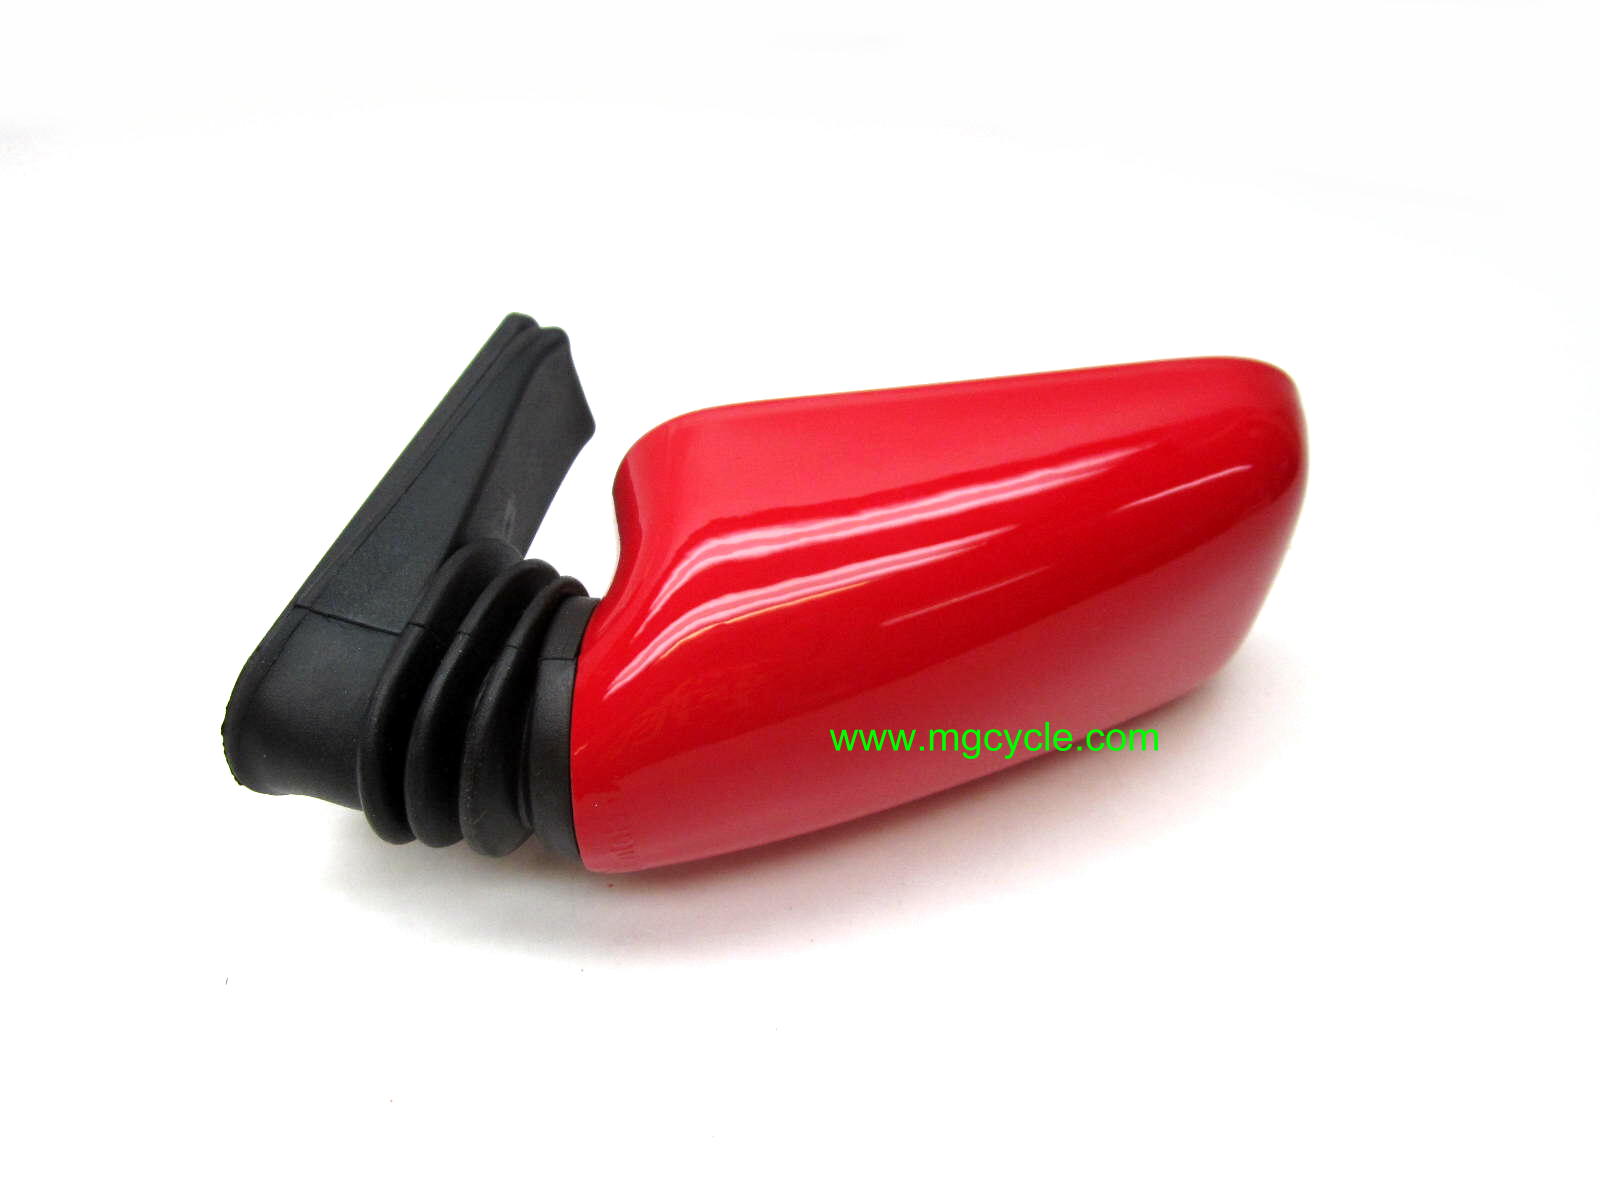 52340011A - $172.43 - left or right side mirror, red, OEM Ducati 900SS ...